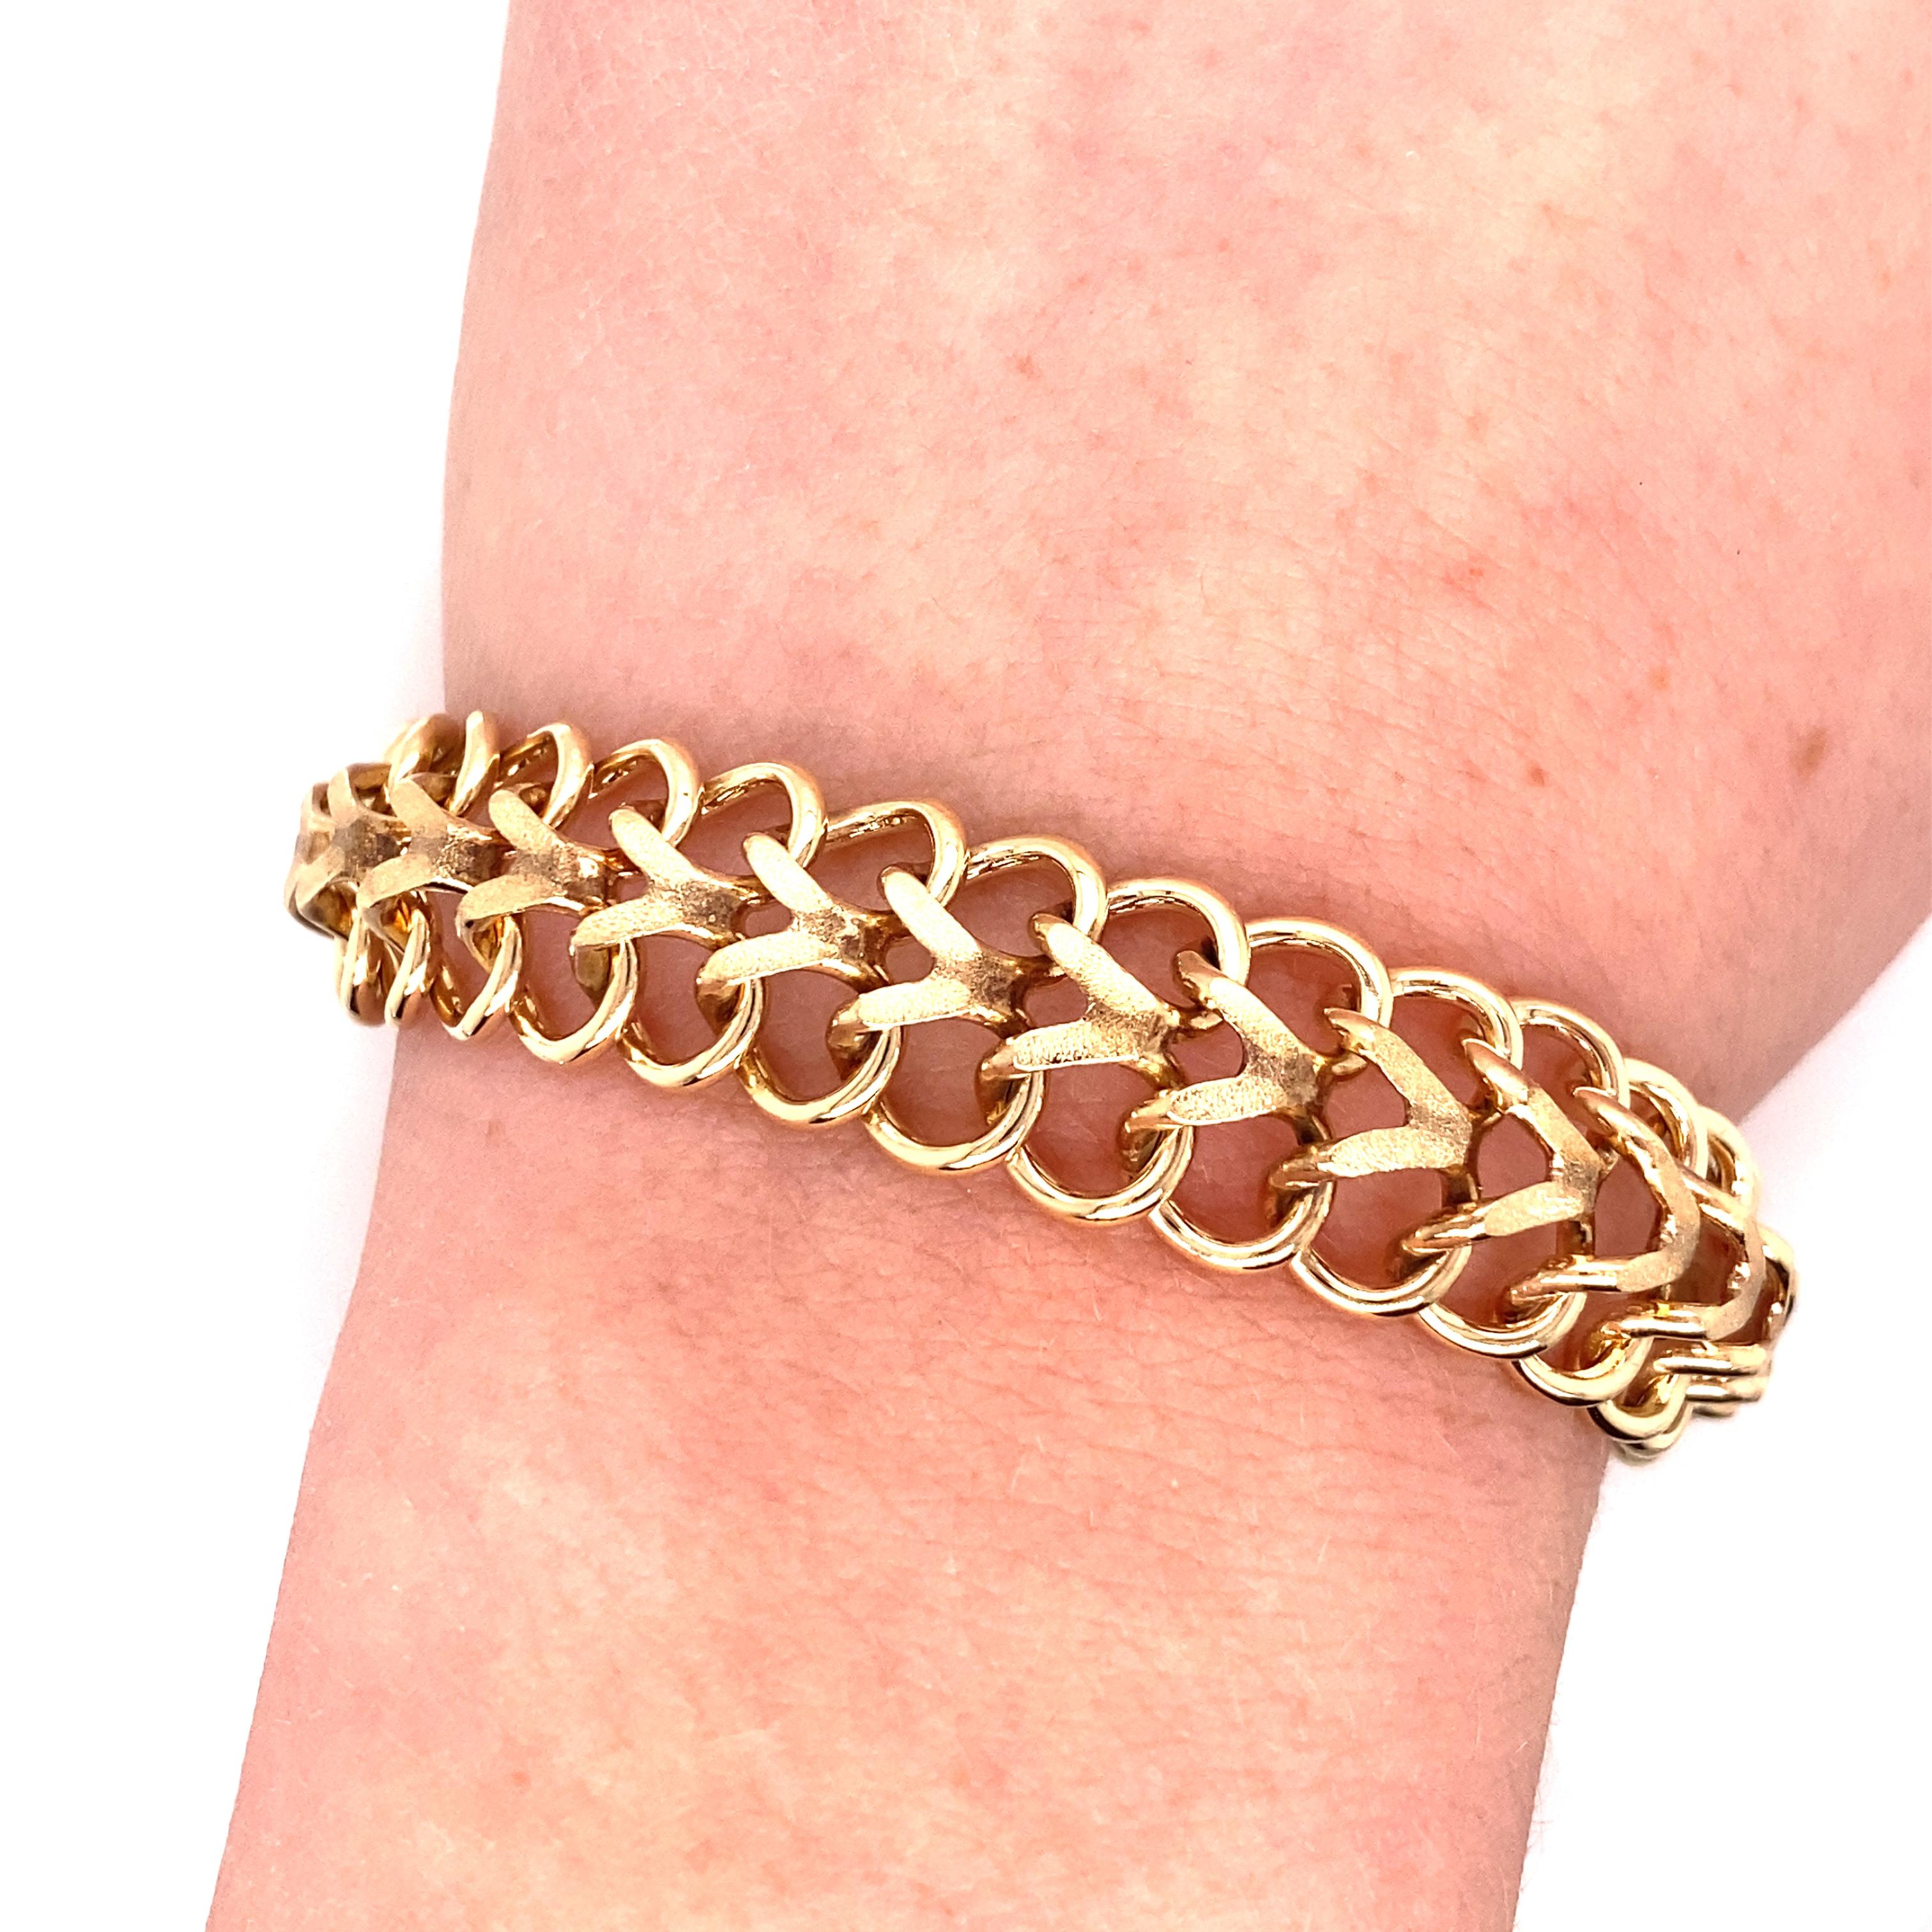 Vintage 1970'S 14K Yellow Gold Charm Link Bracelet - The bracelet measures .5 inches wide and 7.5 inches long and the links are solid. The clasp is a hidden plunger clasp with a safety latch. The bracelet weighs 33.76 grams of gold. 